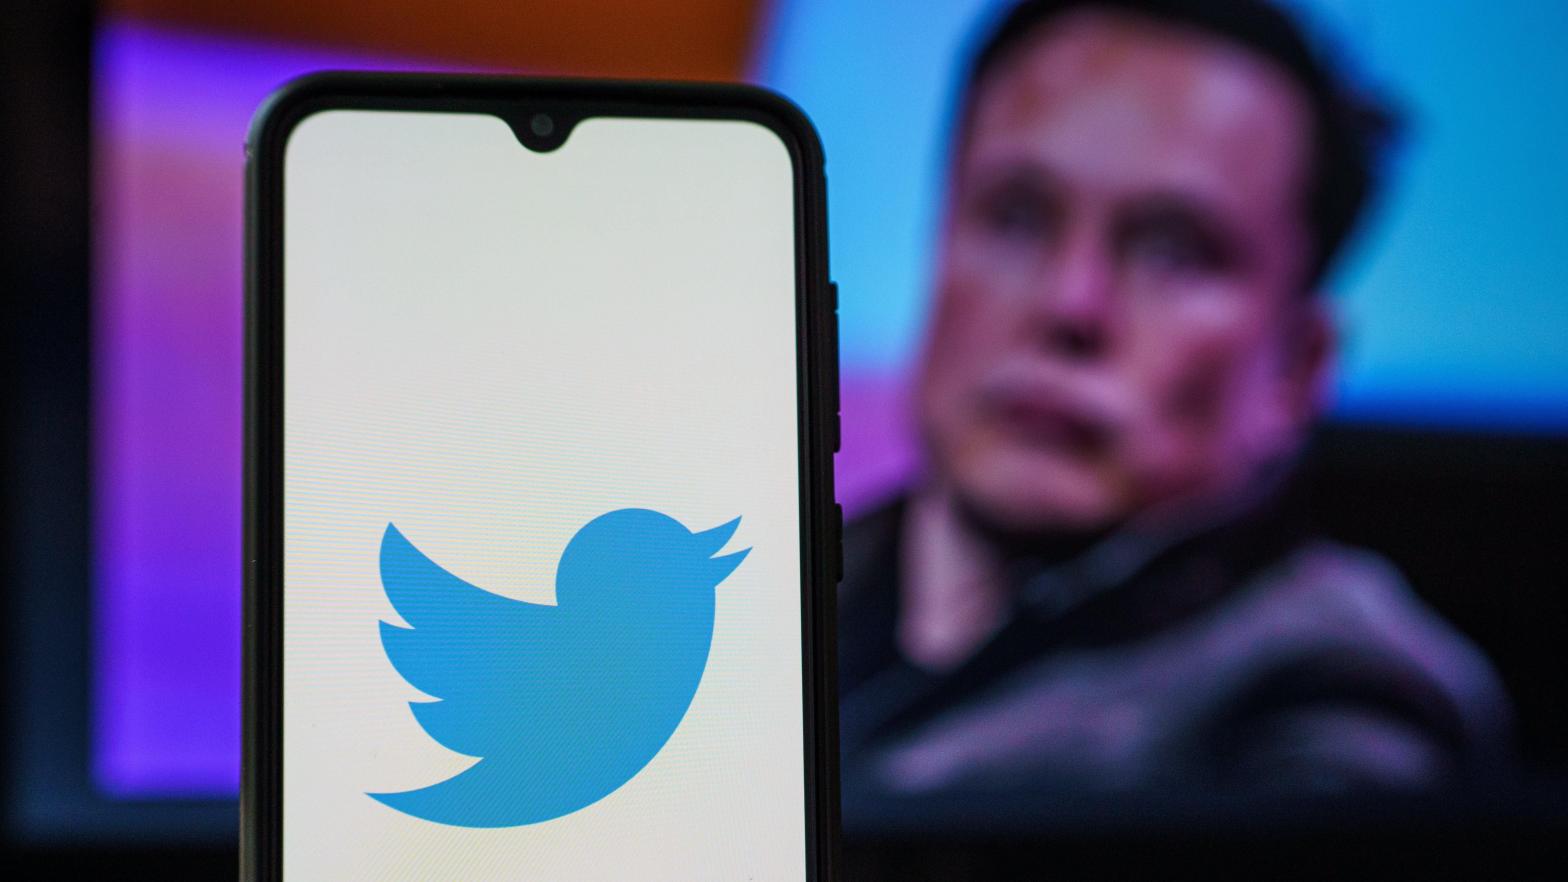 The move is on brand for this new Twitter, which Musk has been hellbent on making a crucible of free speech despite having no clue what free speech is. (Image: Rokas Tenys, Shutterstock)